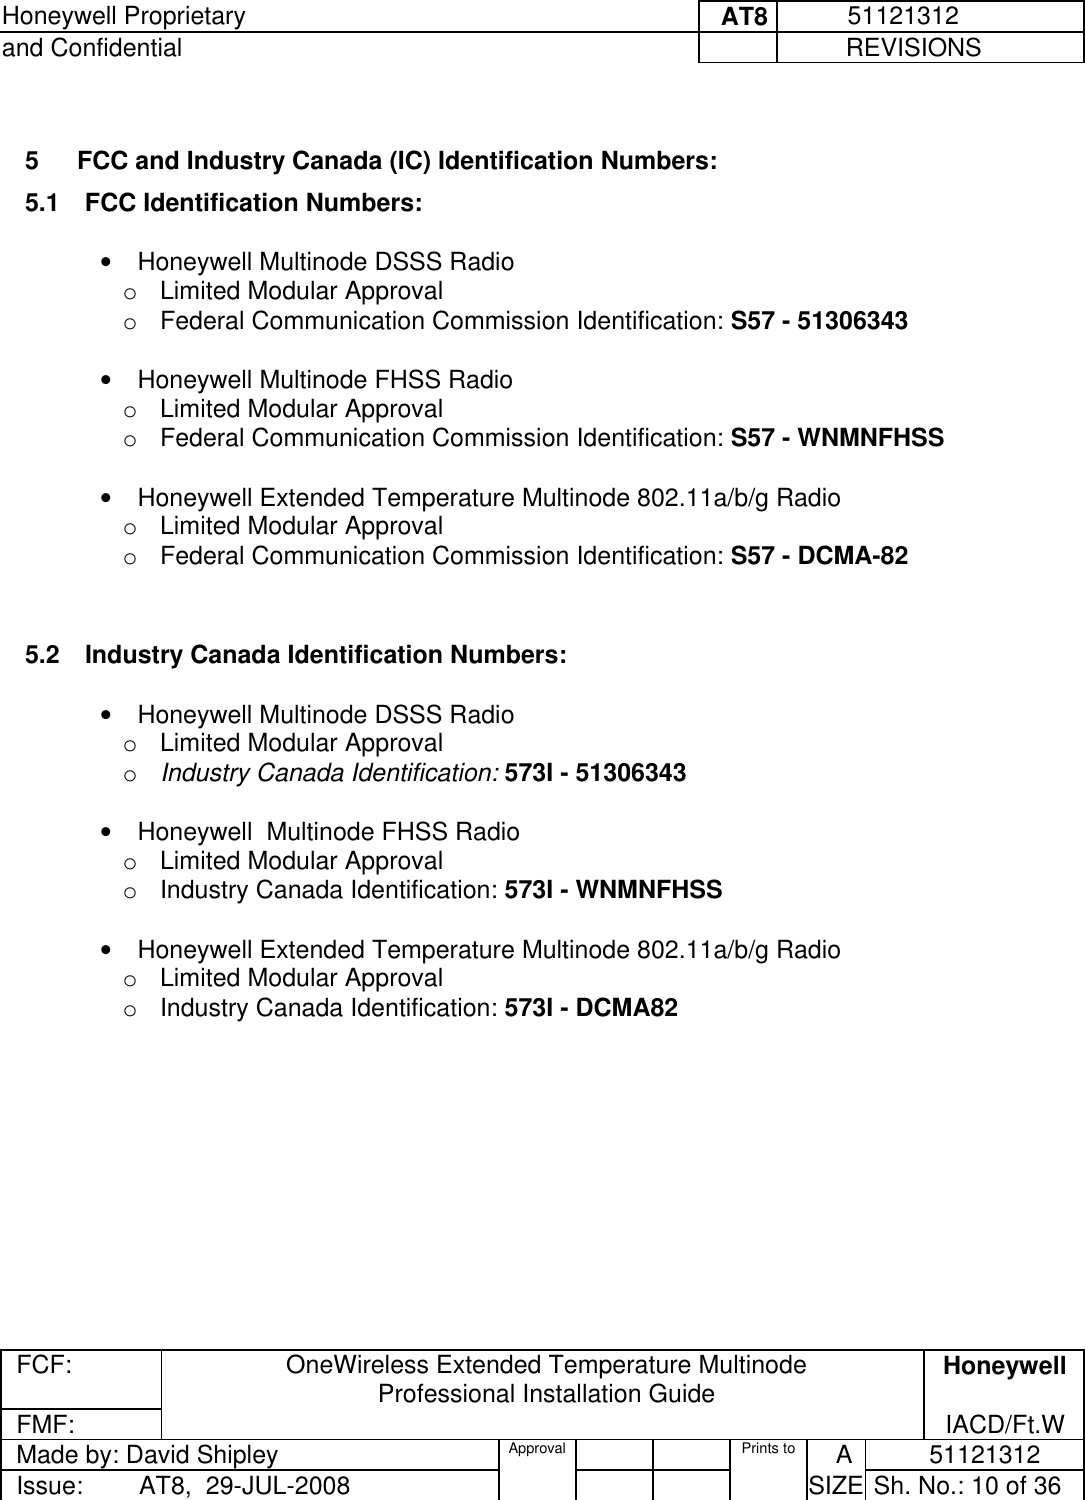 Honeywell Proprietary     AT8           51121312 and Confidential             REVISIONS  FCF: OneWireless Extended Temperature Multinode  Professional Installation Guide  Honeywell FMF:               IACD/Ft.W Made by: David Shipley  Approval   Prints to     A           51121312 Issue:        AT8,  29-JUL-2008          SIZE  Sh. No.: 10 of 36   5   FCC and Industry Canada (IC) Identification Numbers:  5.1  FCC Identification Numbers:   •  Honeywell Multinode DSSS Radio  o  Limited Modular Approval    o  Federal Communication Commission Identification: S57 - 51306343    •  Honeywell Multinode FHSS Radio  o  Limited Modular Approval    o  Federal Communication Commission Identification: S57 - WNMNFHSS   •  Honeywell Extended Temperature Multinode 802.11a/b/g Radio  o  Limited Modular Approval    o  Federal Communication Commission Identification: S57 - DCMA-82   5.2  Industry Canada Identification Numbers:   •  Honeywell Multinode DSSS Radio  o  Limited Modular Approval    o  Industry Canada Identification: 573I - 51306343   •  Honeywell  Multinode FHSS Radio  o  Limited Modular Approval    o  Industry Canada Identification: 573I - WNMNFHSS   •  Honeywell Extended Temperature Multinode 802.11a/b/g Radio  o  Limited Modular Approval    o  Industry Canada Identification: 573I - DCMA82    